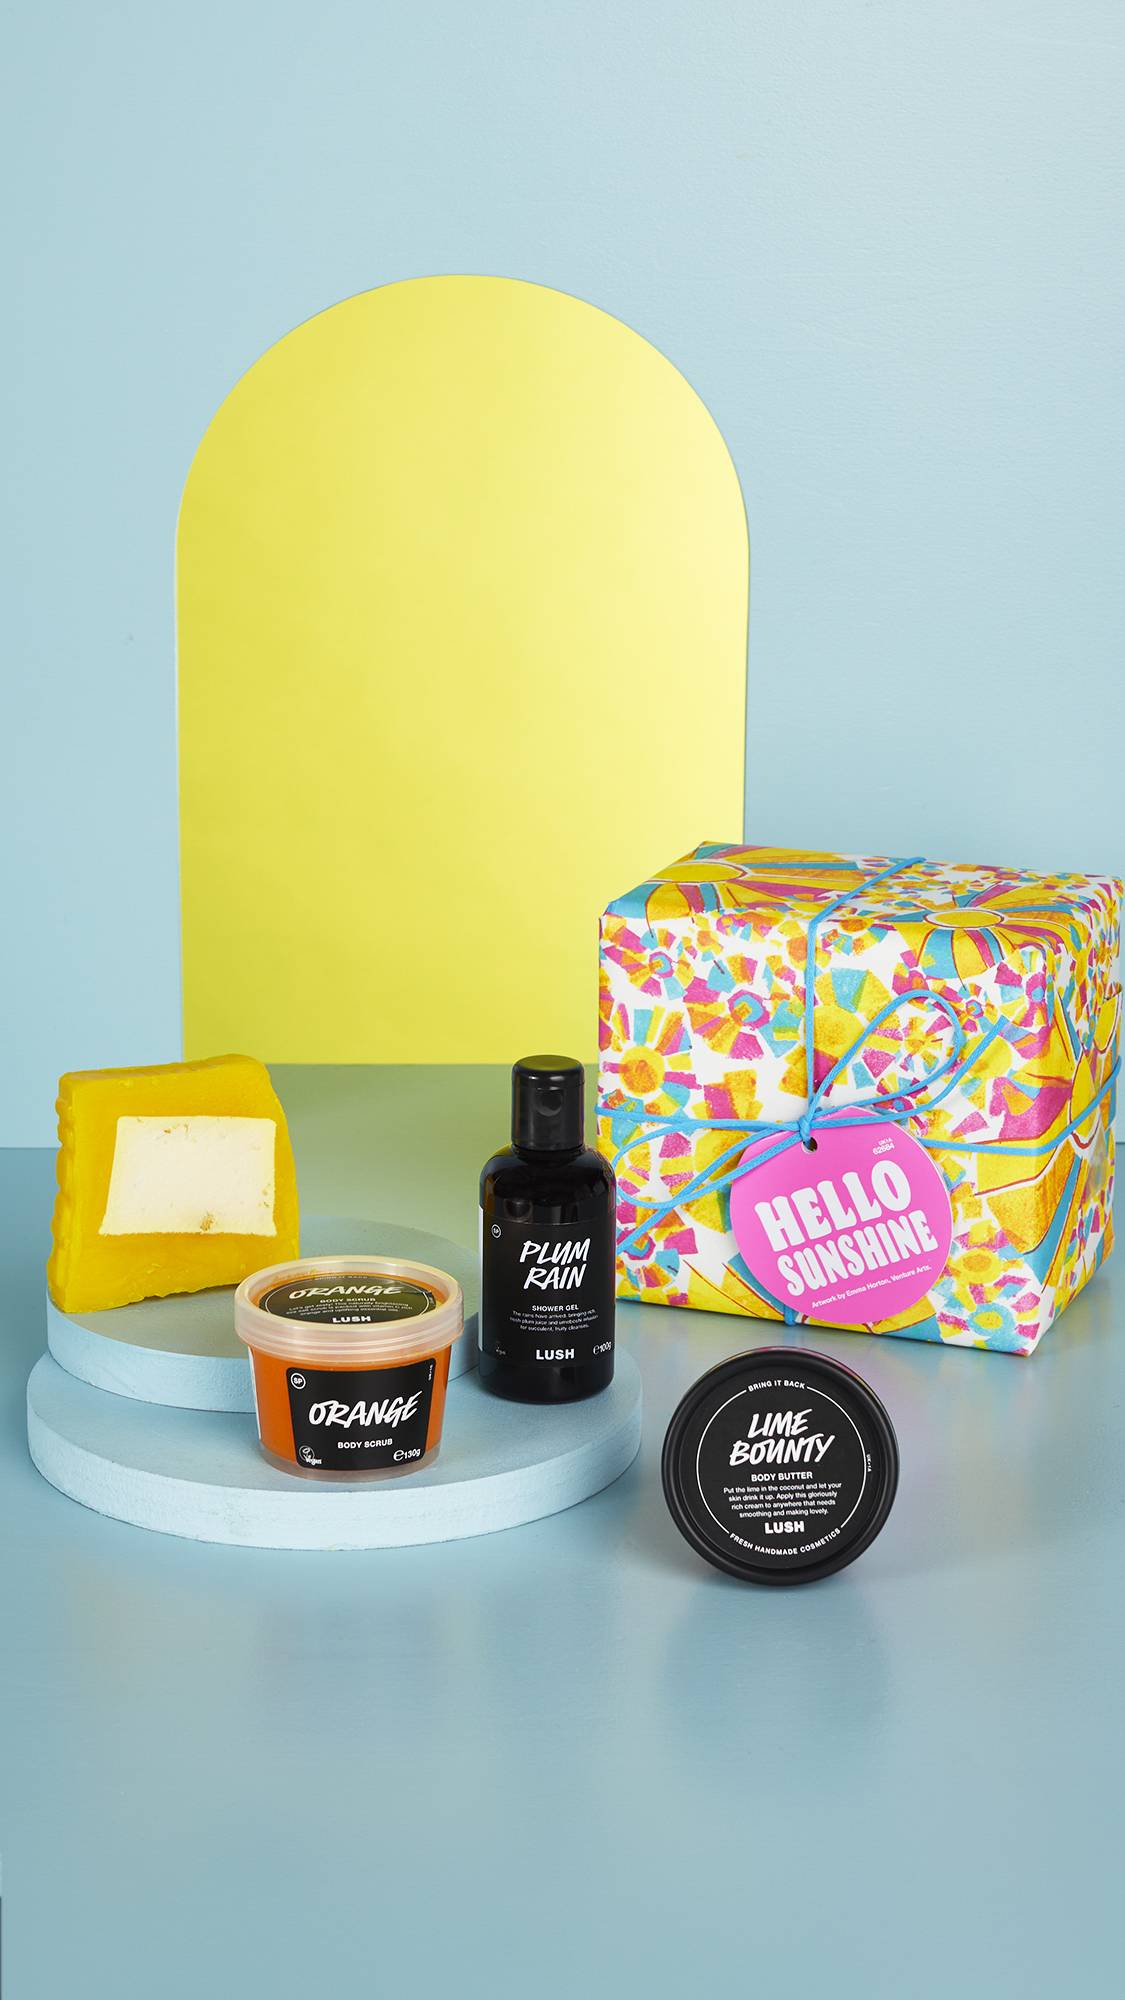 The vibrant, sun-patterned gift box and the four LUSH products sit on a pastel blue floor and background with an arched mirror in the background.